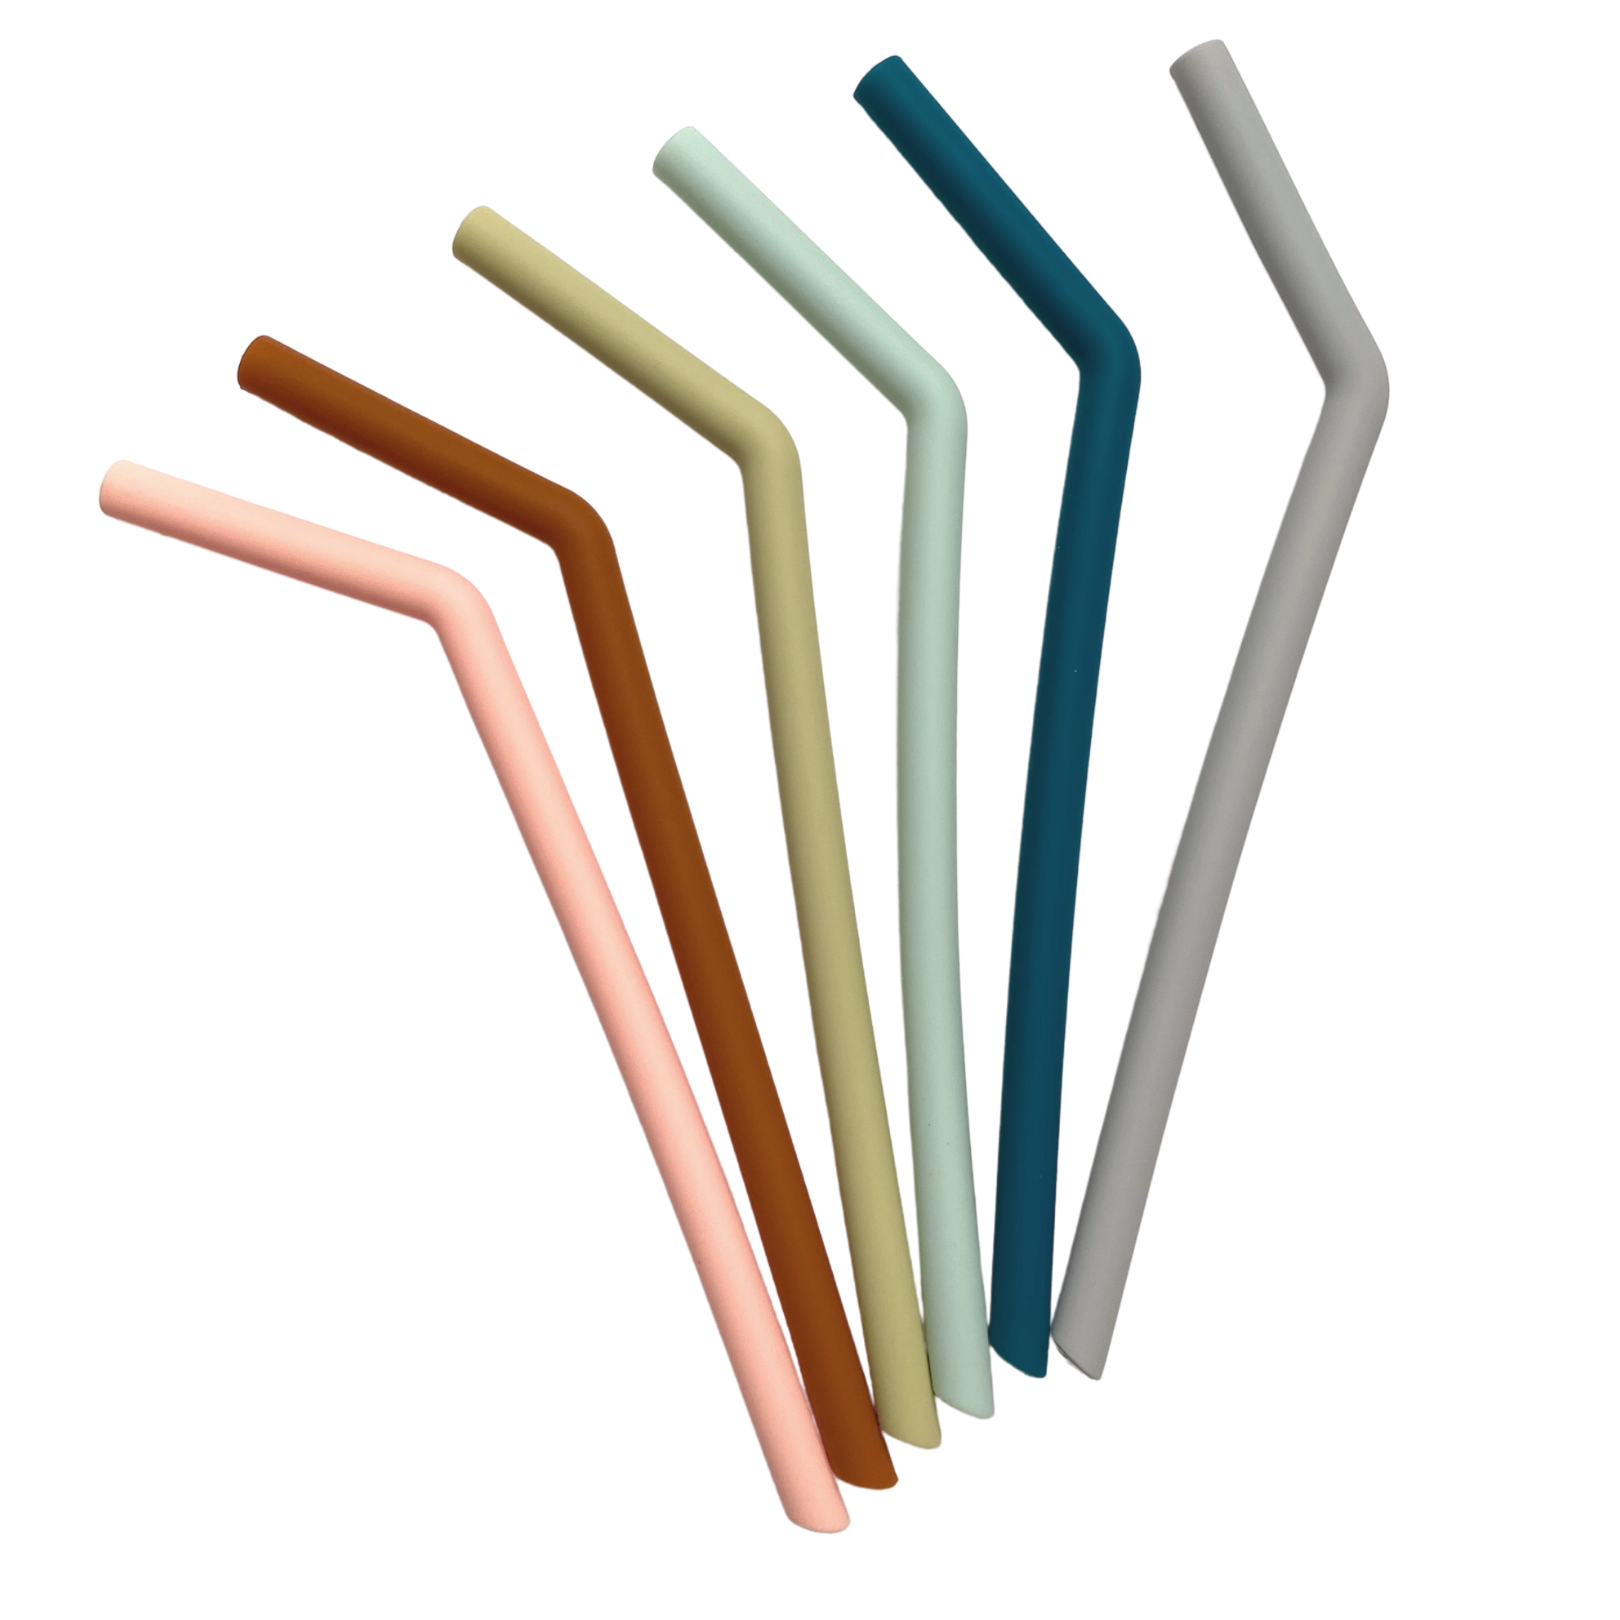 6 Set Reusable Silicone Straw - 10 Inch